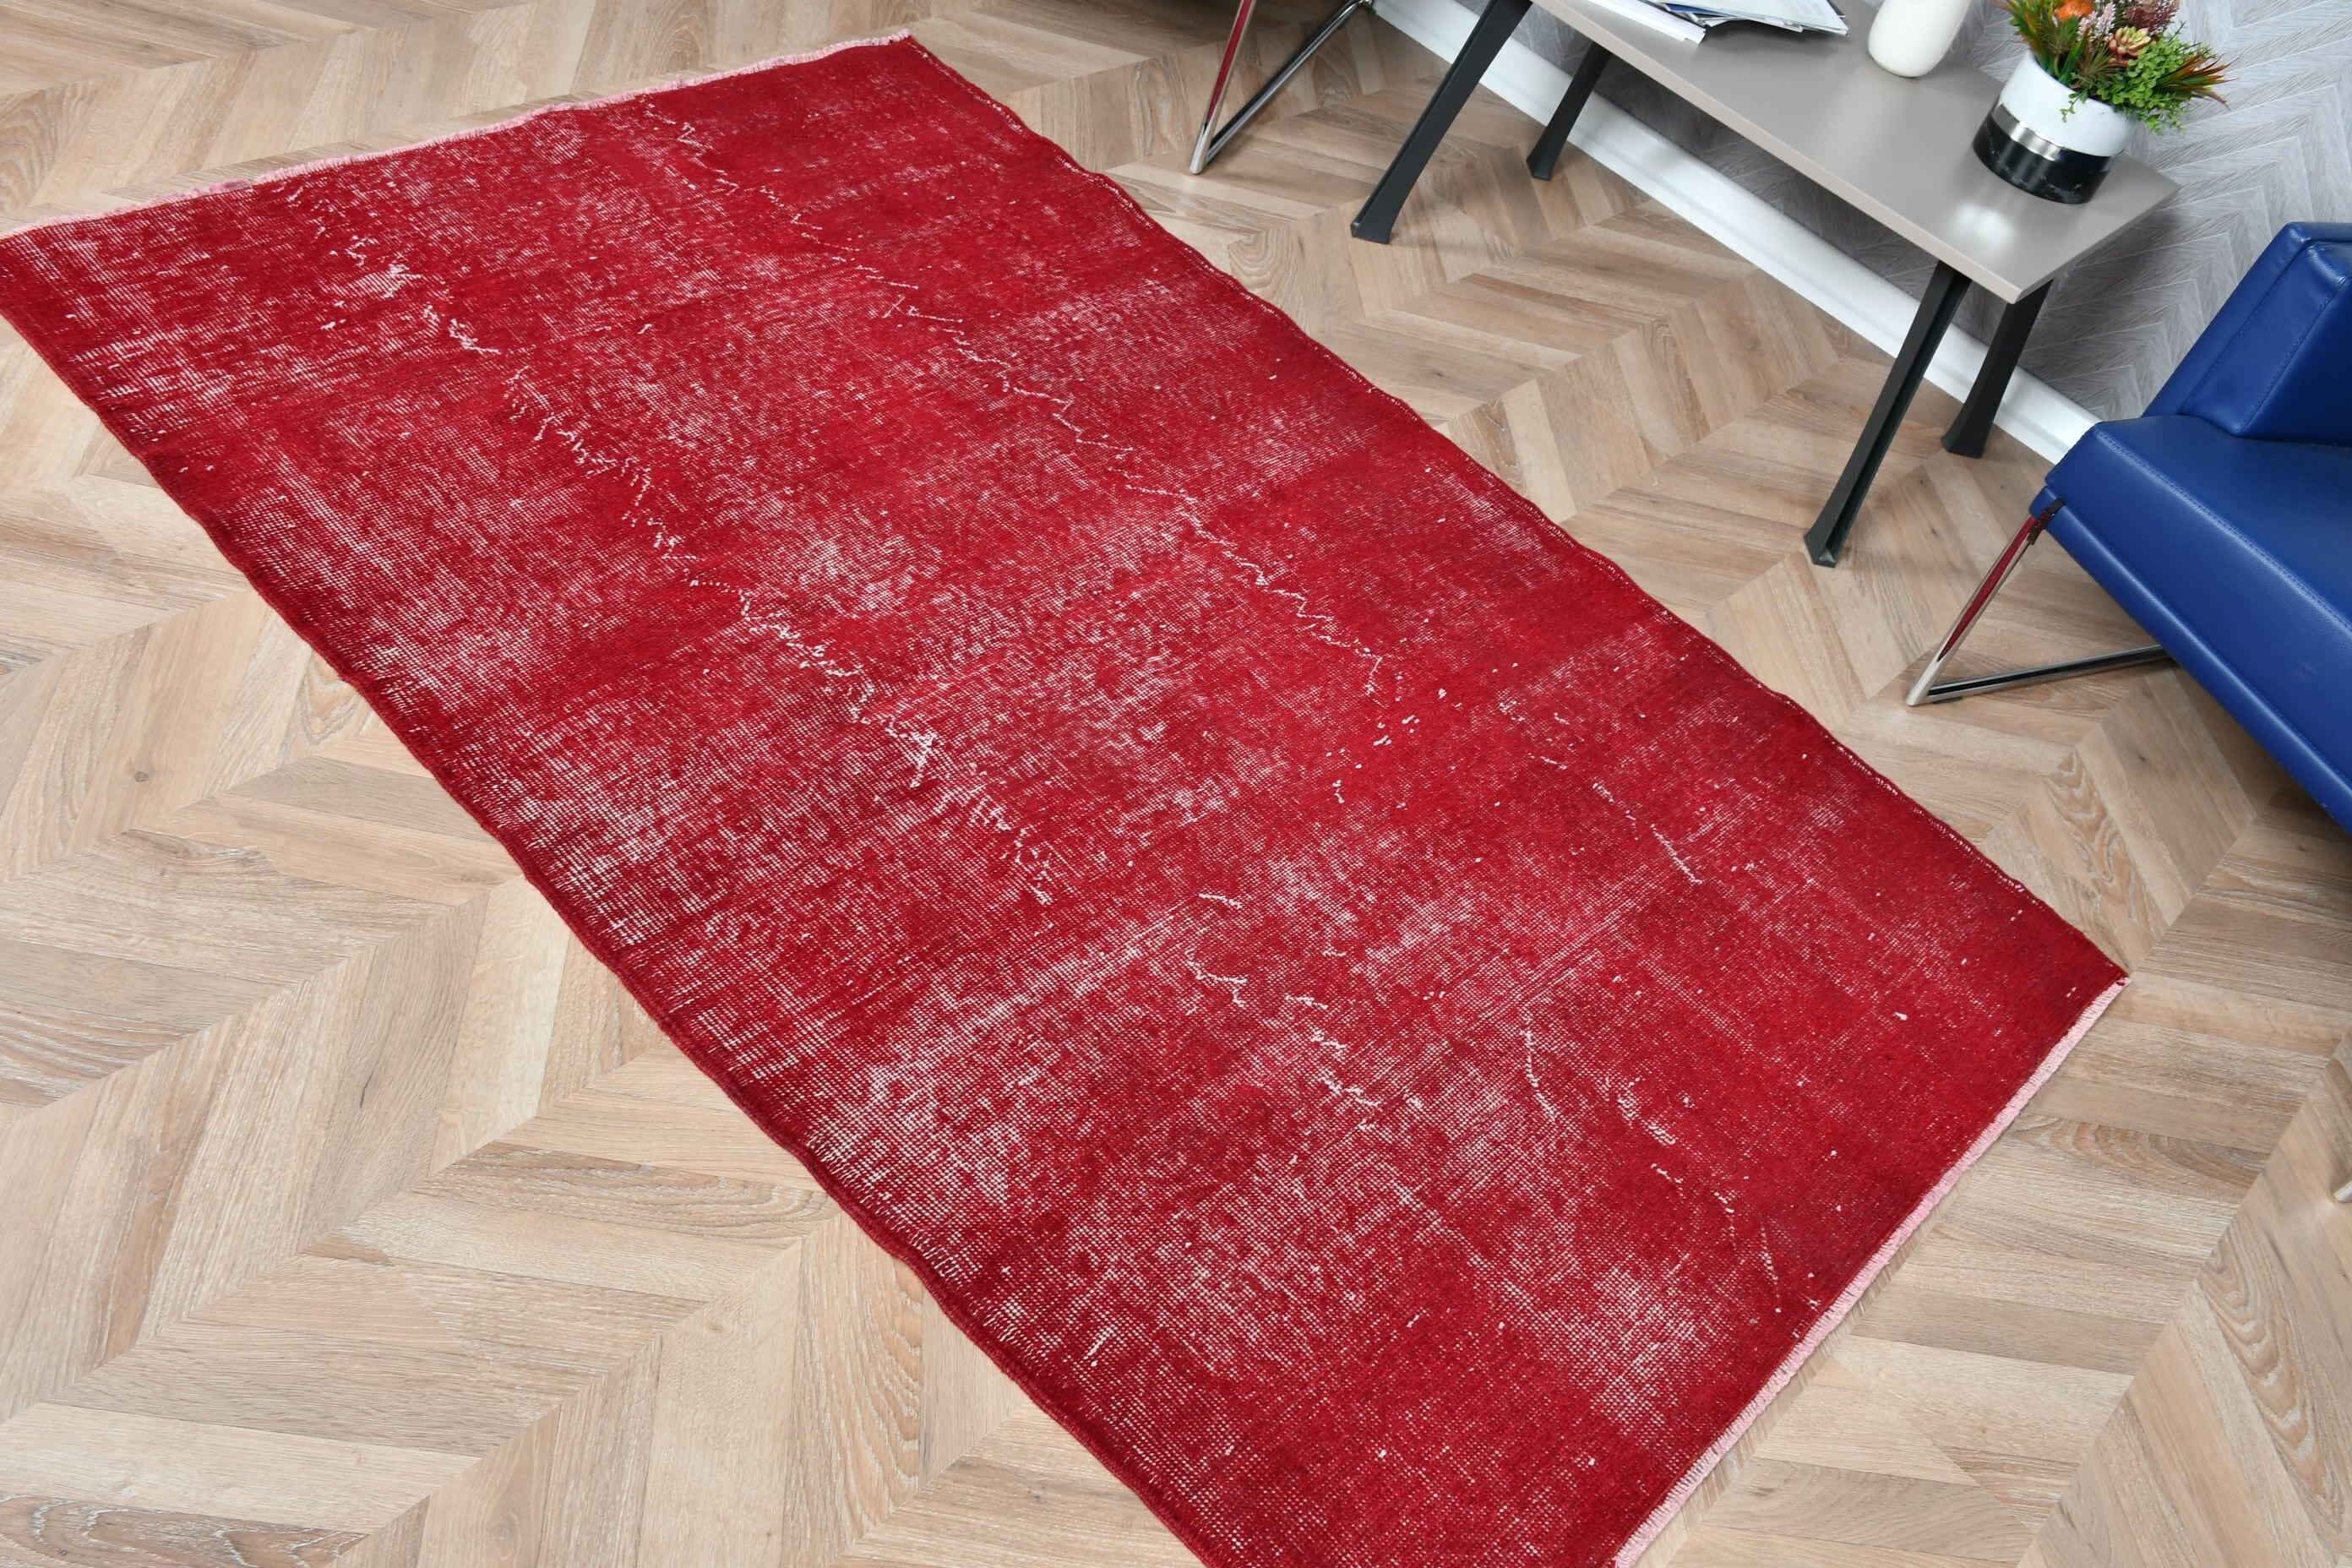 4x6 ft Accent Rugs, Old Rug, Vintage Rug, Oushak Rugs, Rugs for Kitchen, Bedroom Rugs, Turkish Rug, Entry Rug, Nursery Rug, Red Kitchen Rug